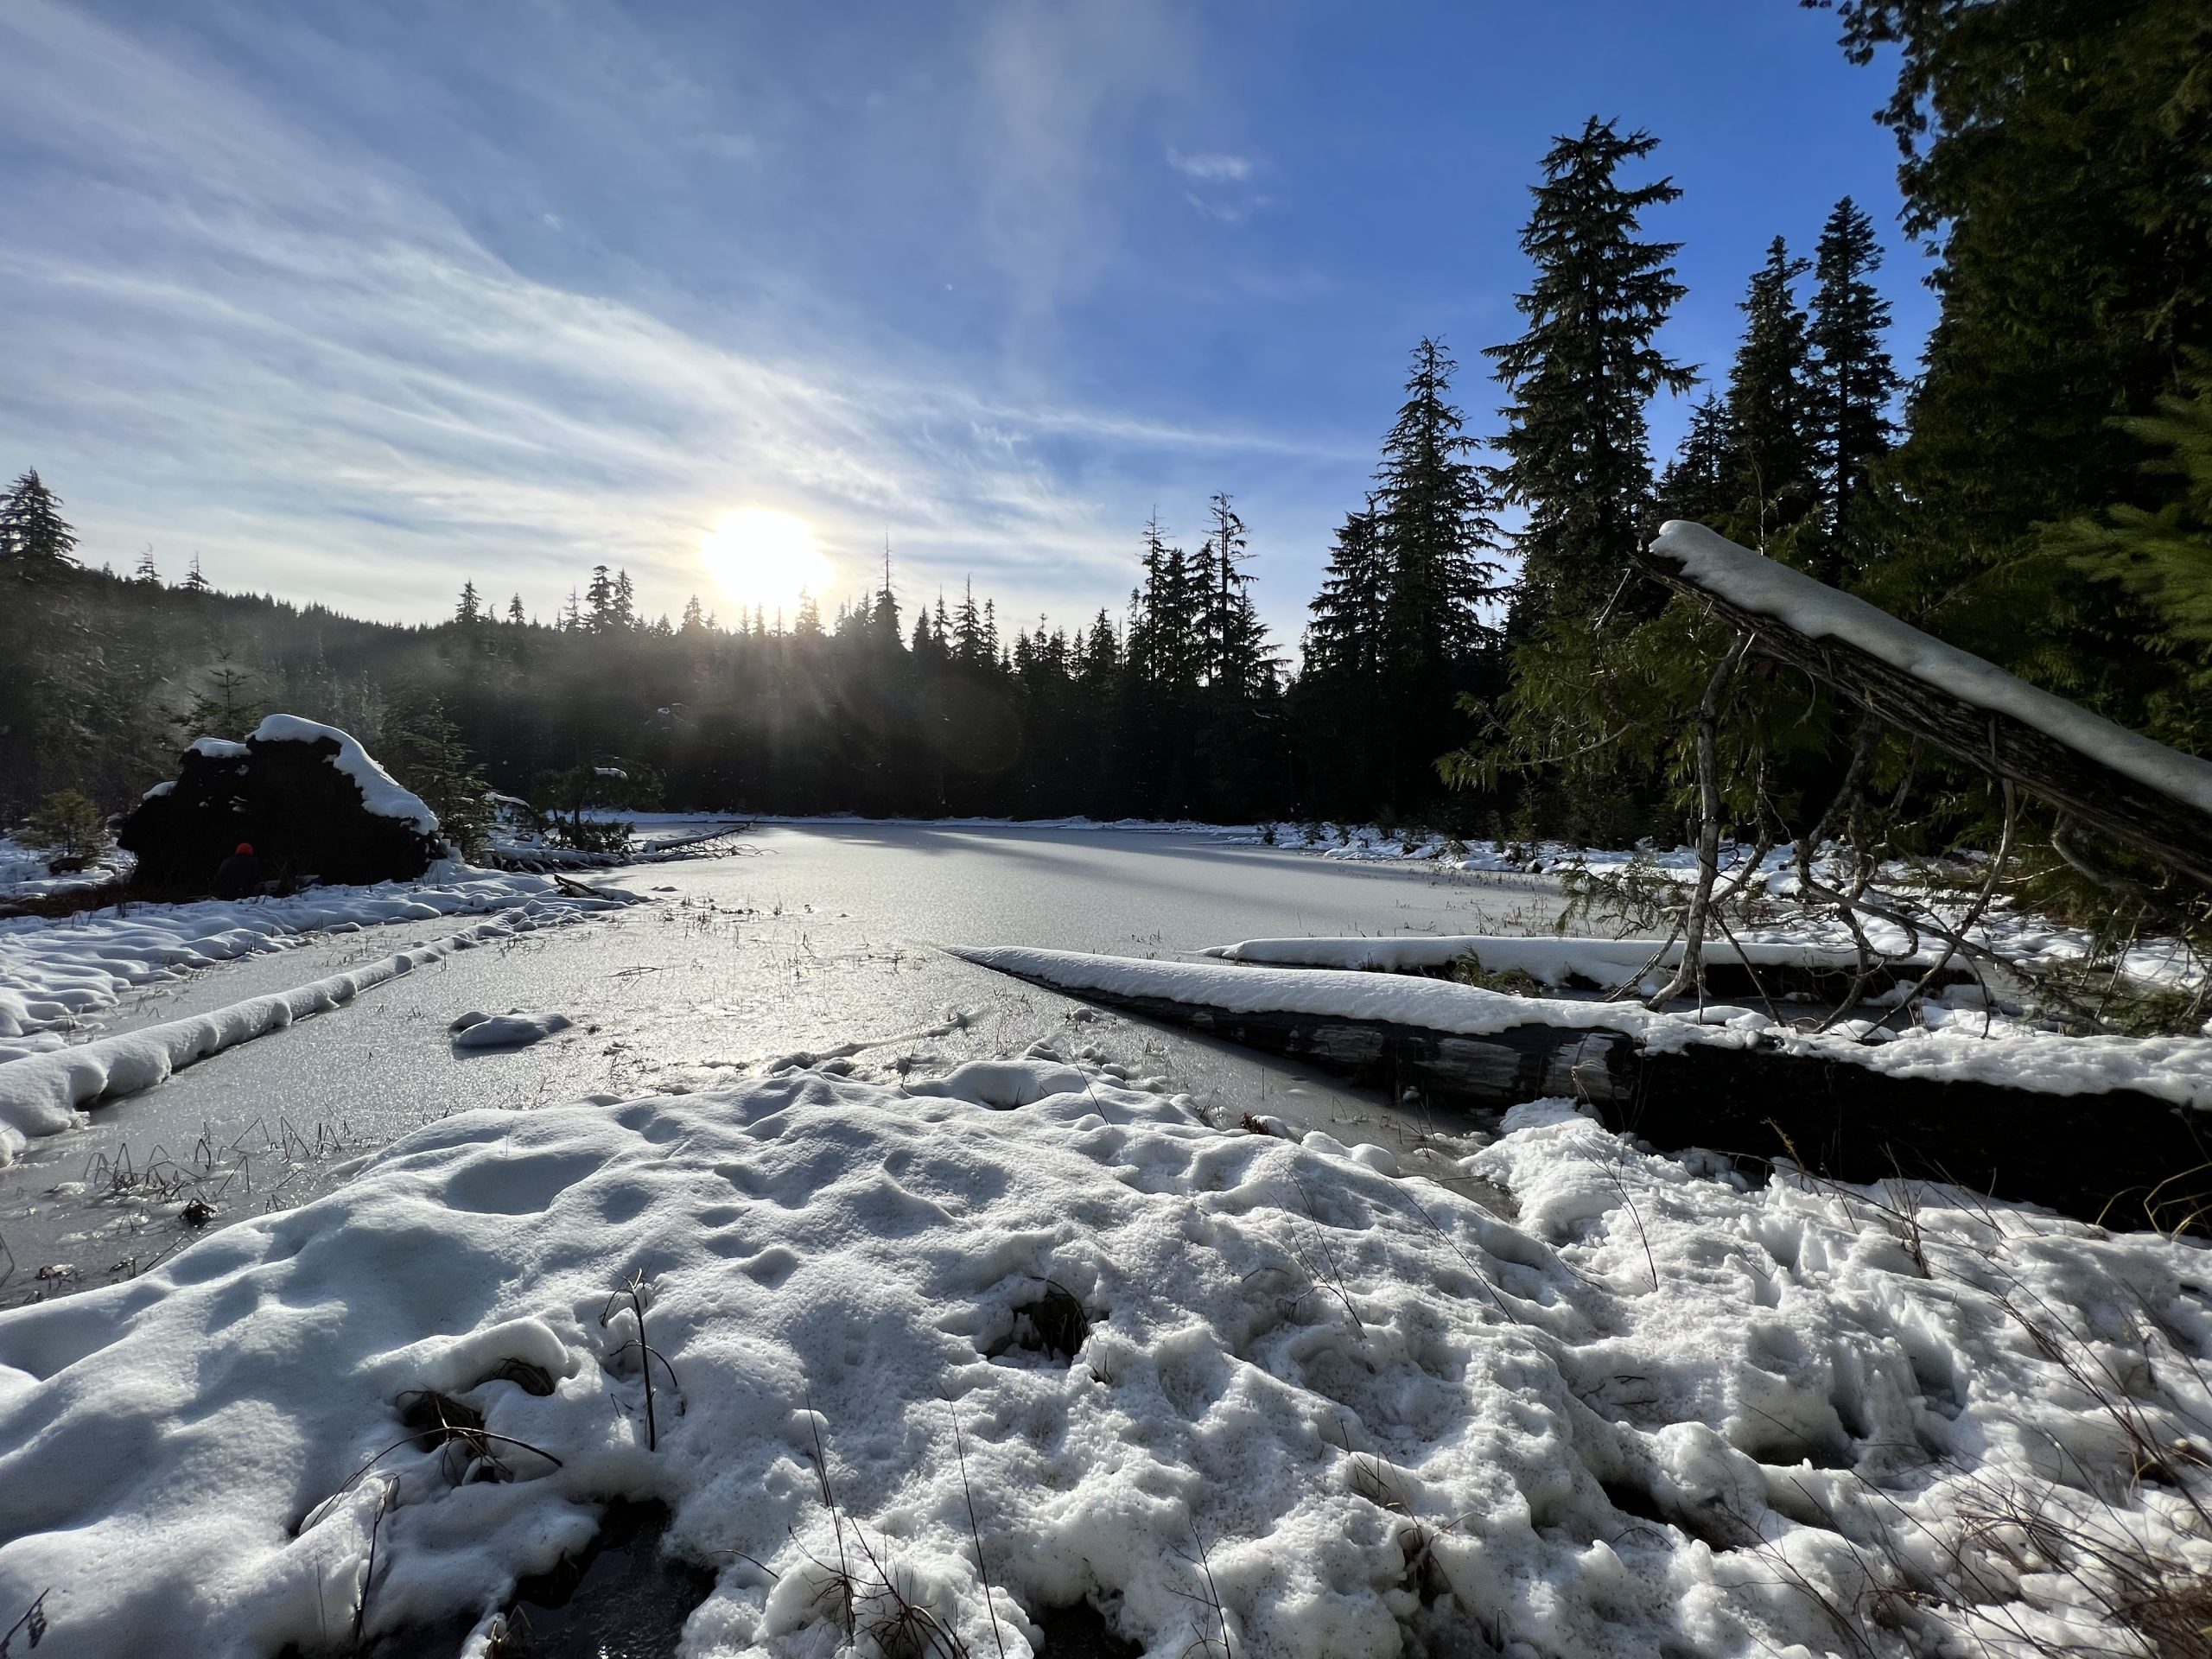 Image: A snowy pond near the beaver release site.